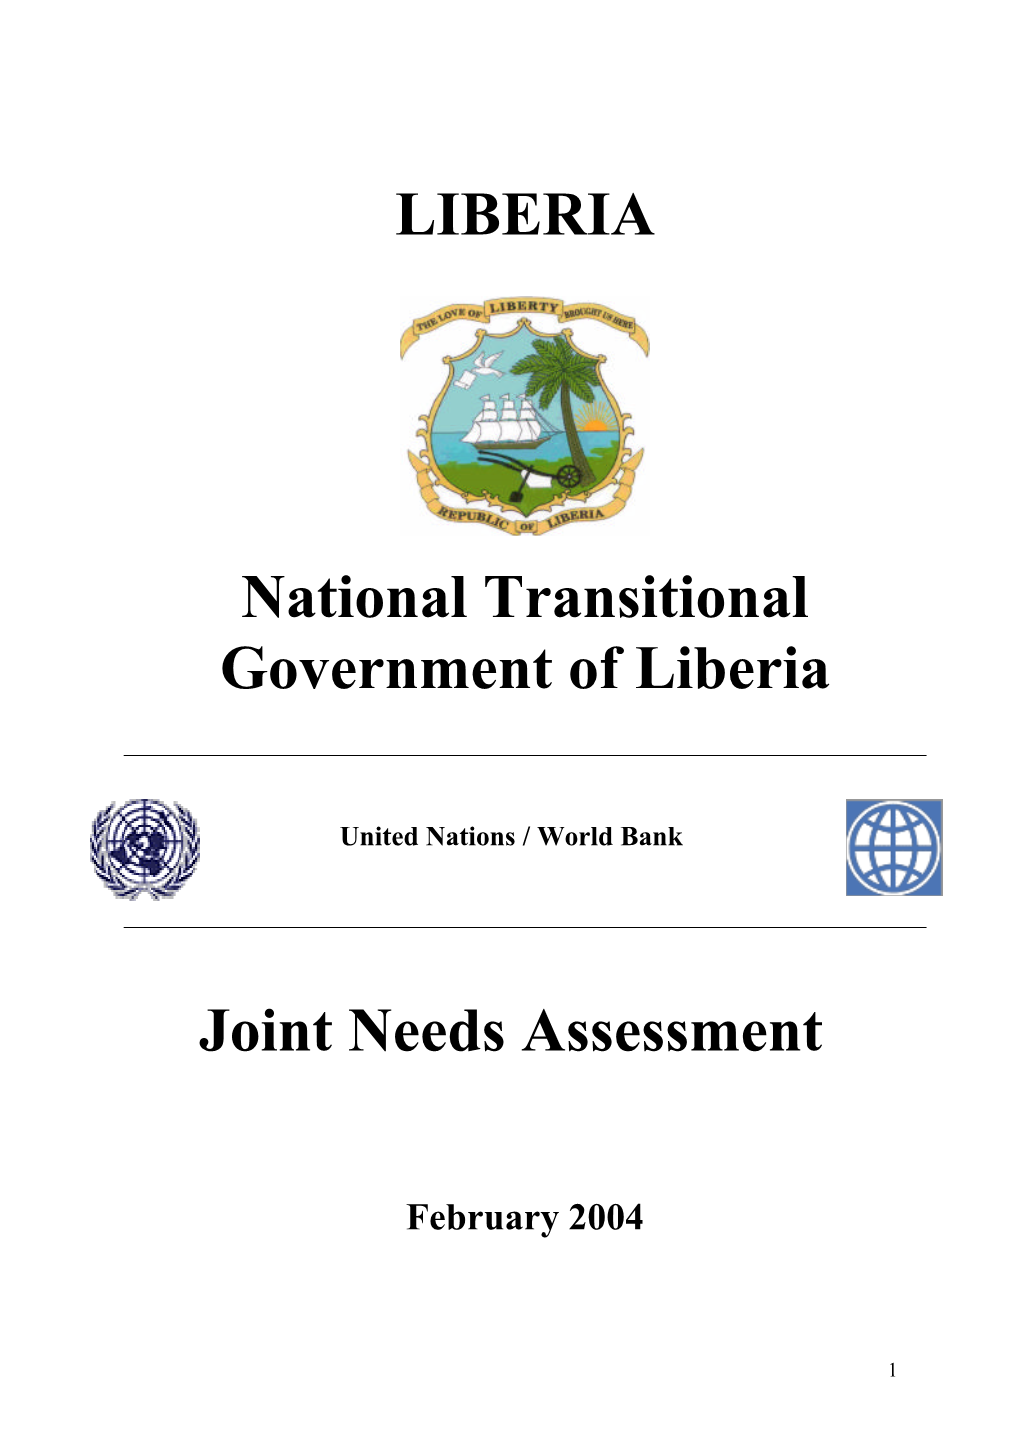 National Transitional Government of Liberia : Join Needs Assessment